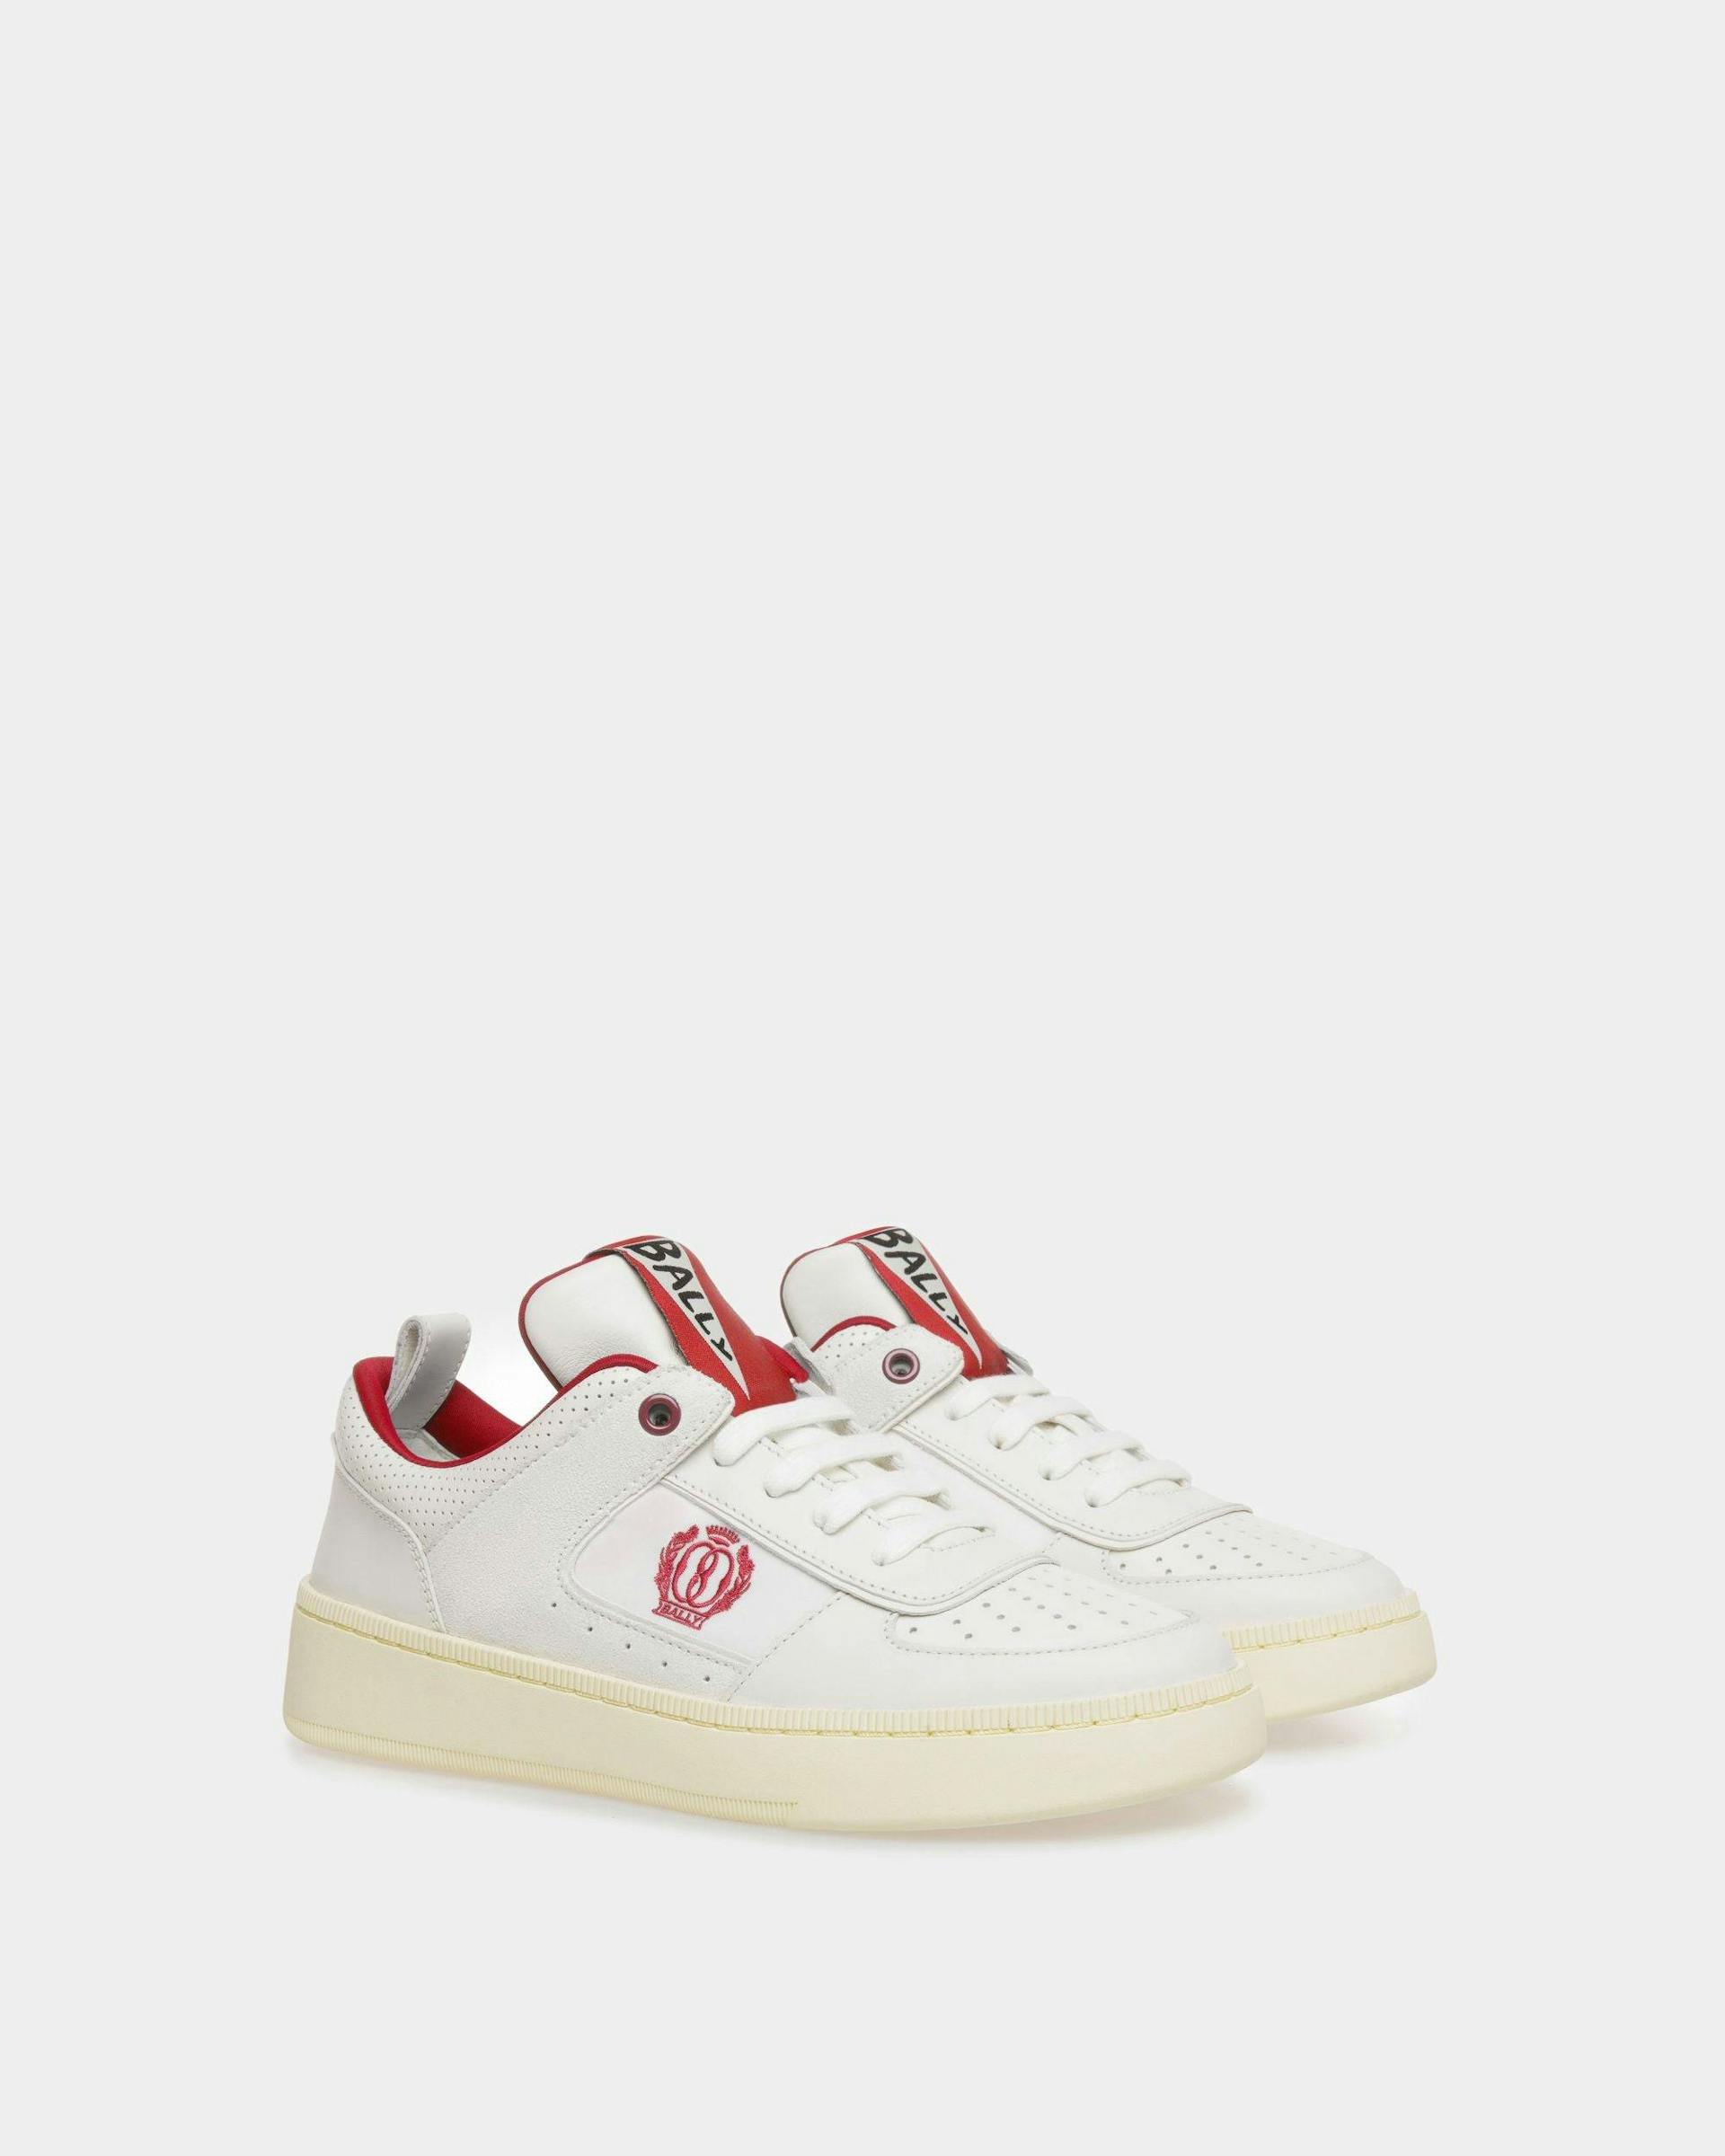 Women's Raise Sneakers In White And Red Leather | Bally | Still Life 3/4 Front